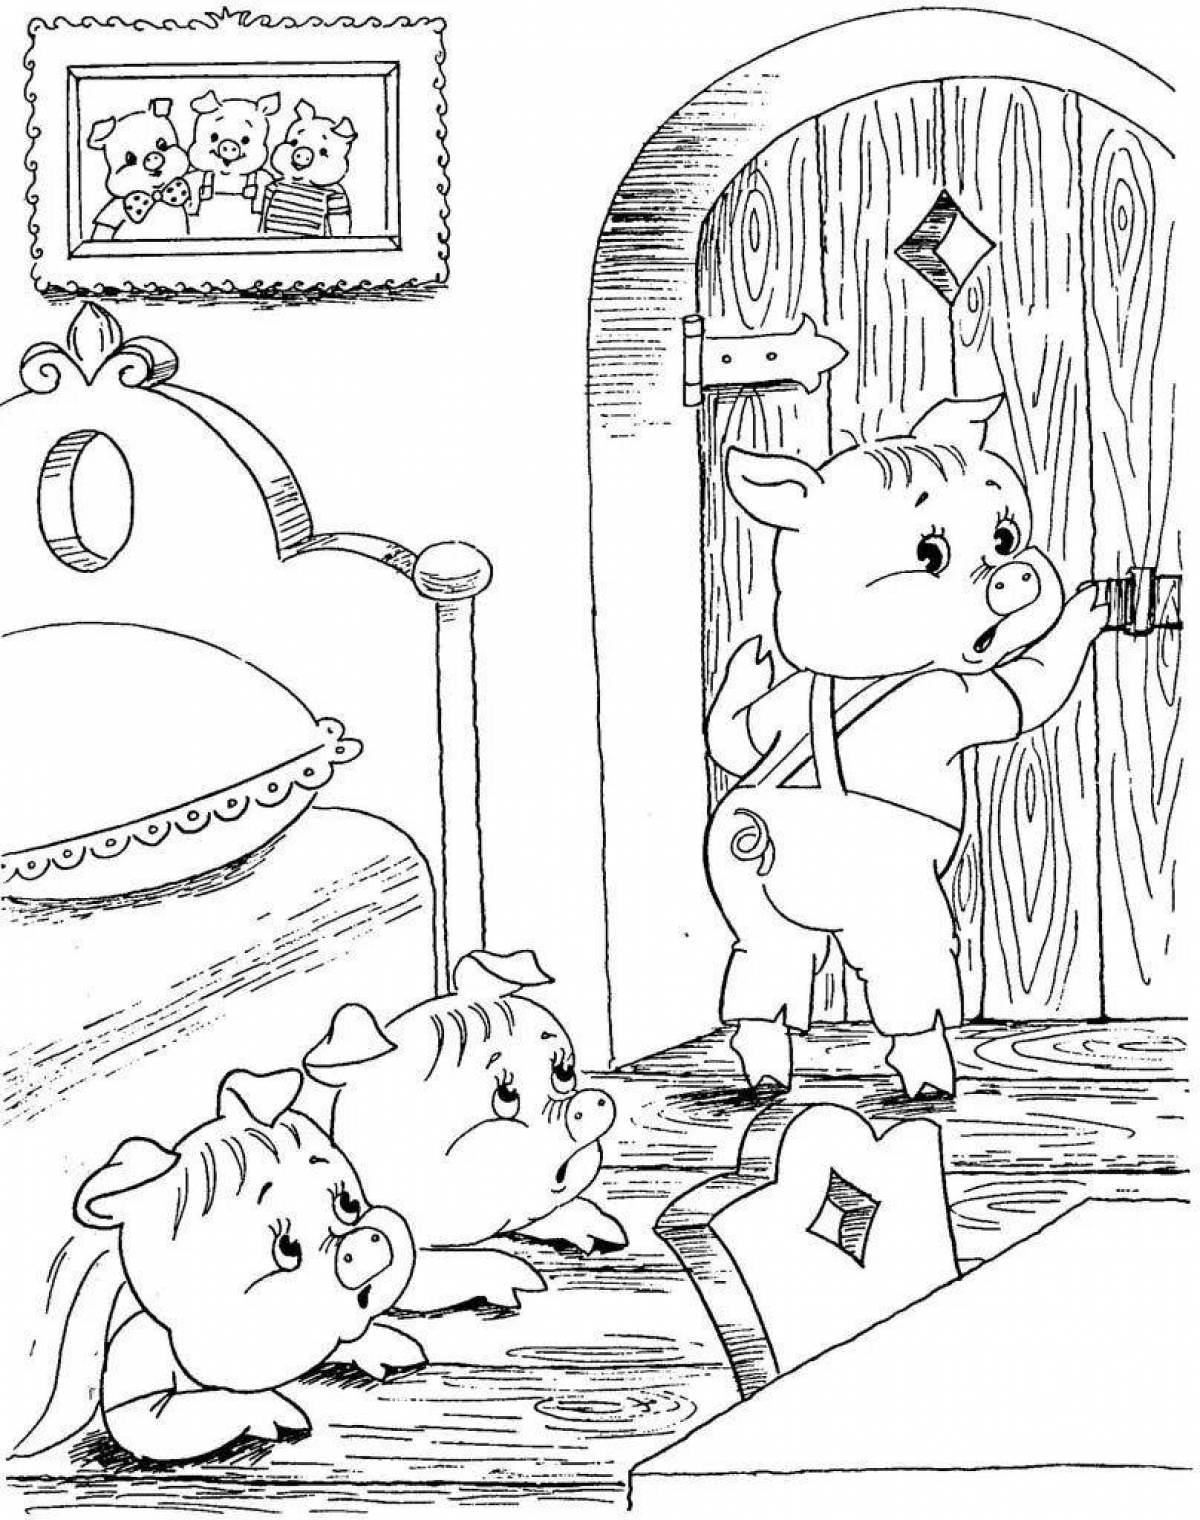 Fun coloring 3 pigs for the little ones